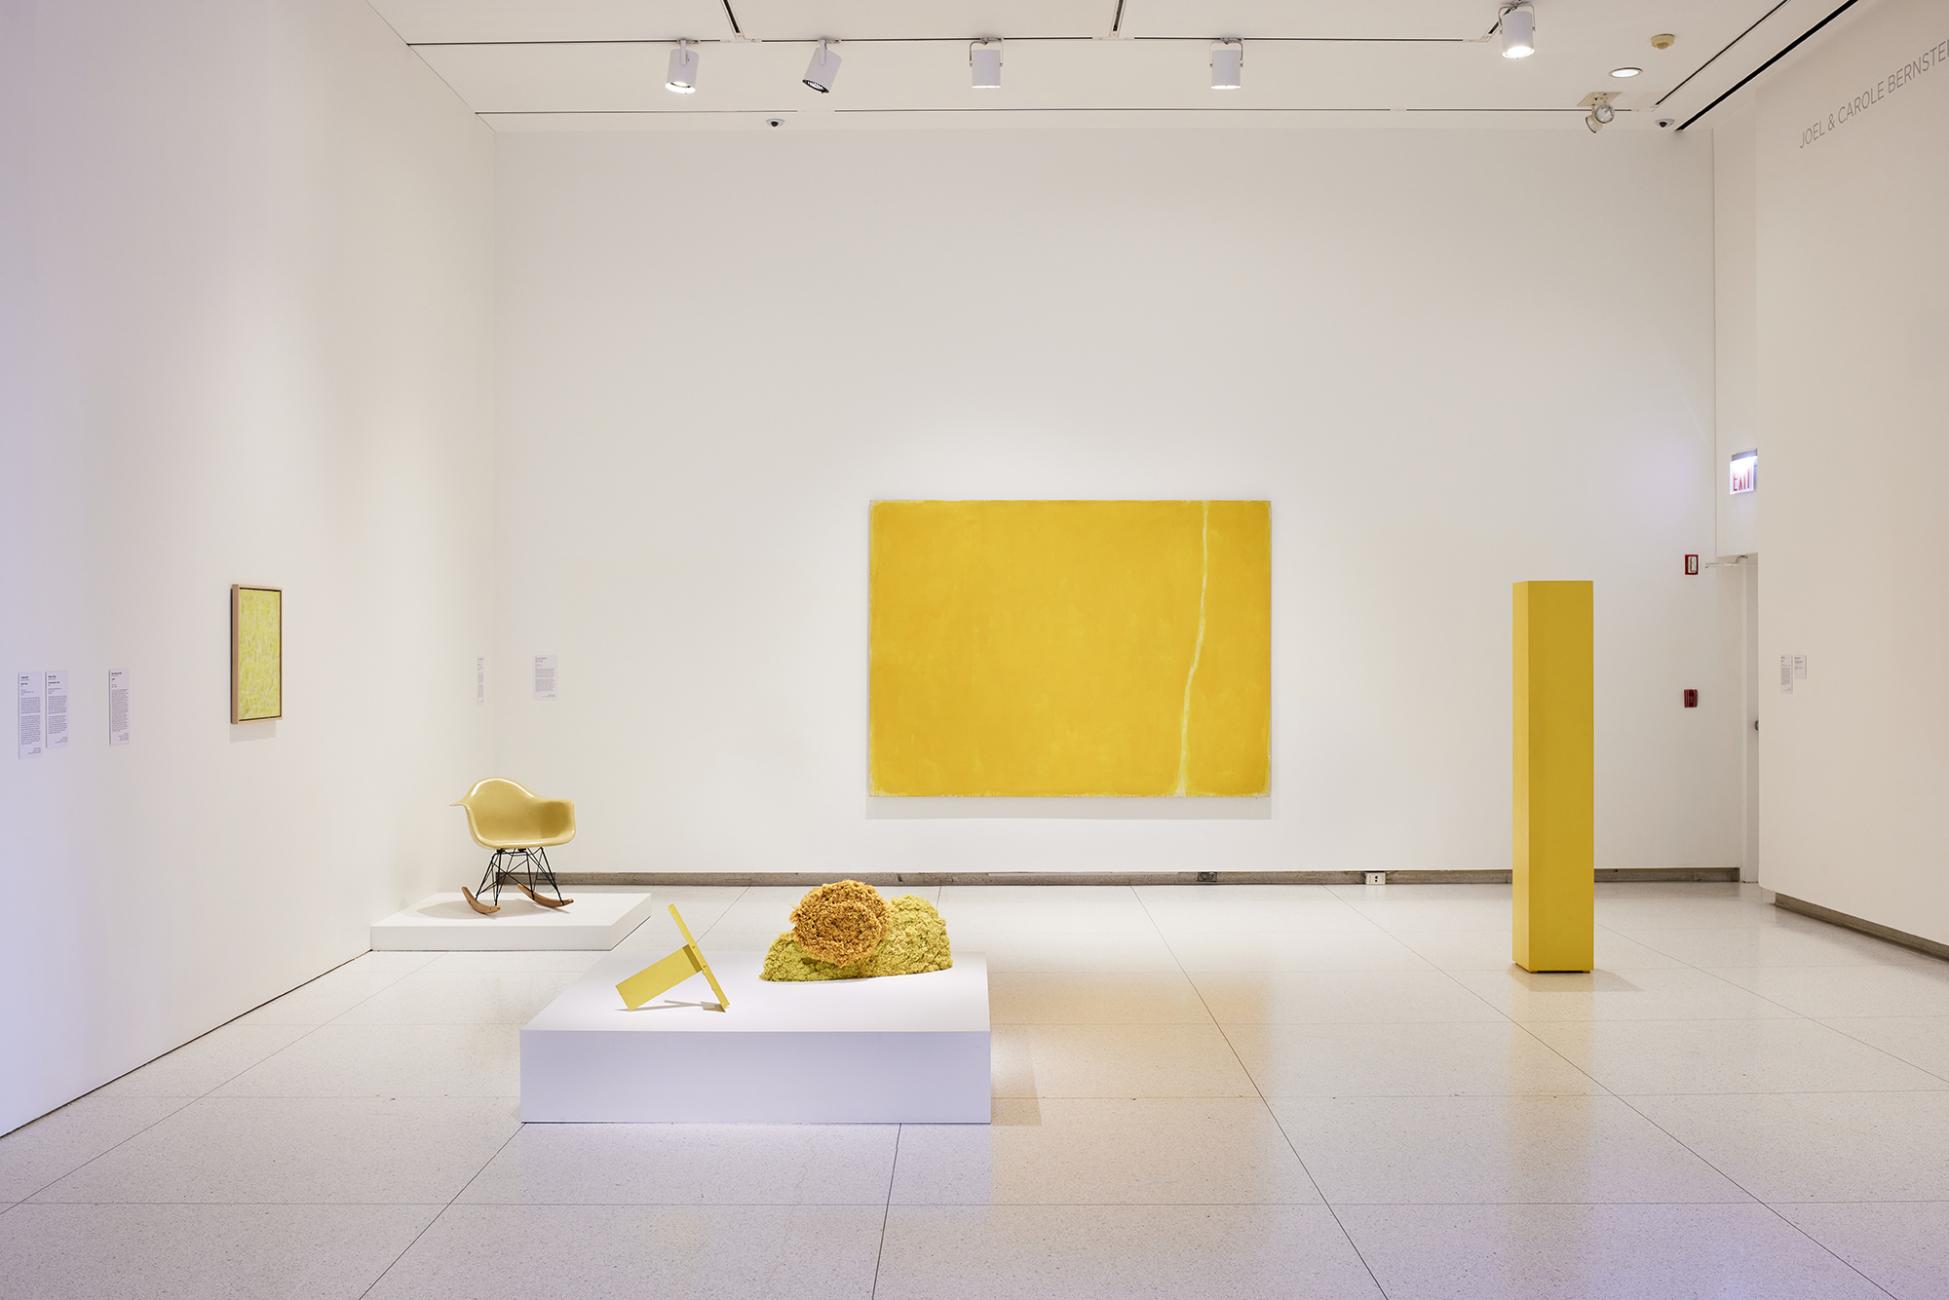 Monochrome Multitudes gallery features works by Charles and Ray Eames, Anne Truitt, and William Turnbull